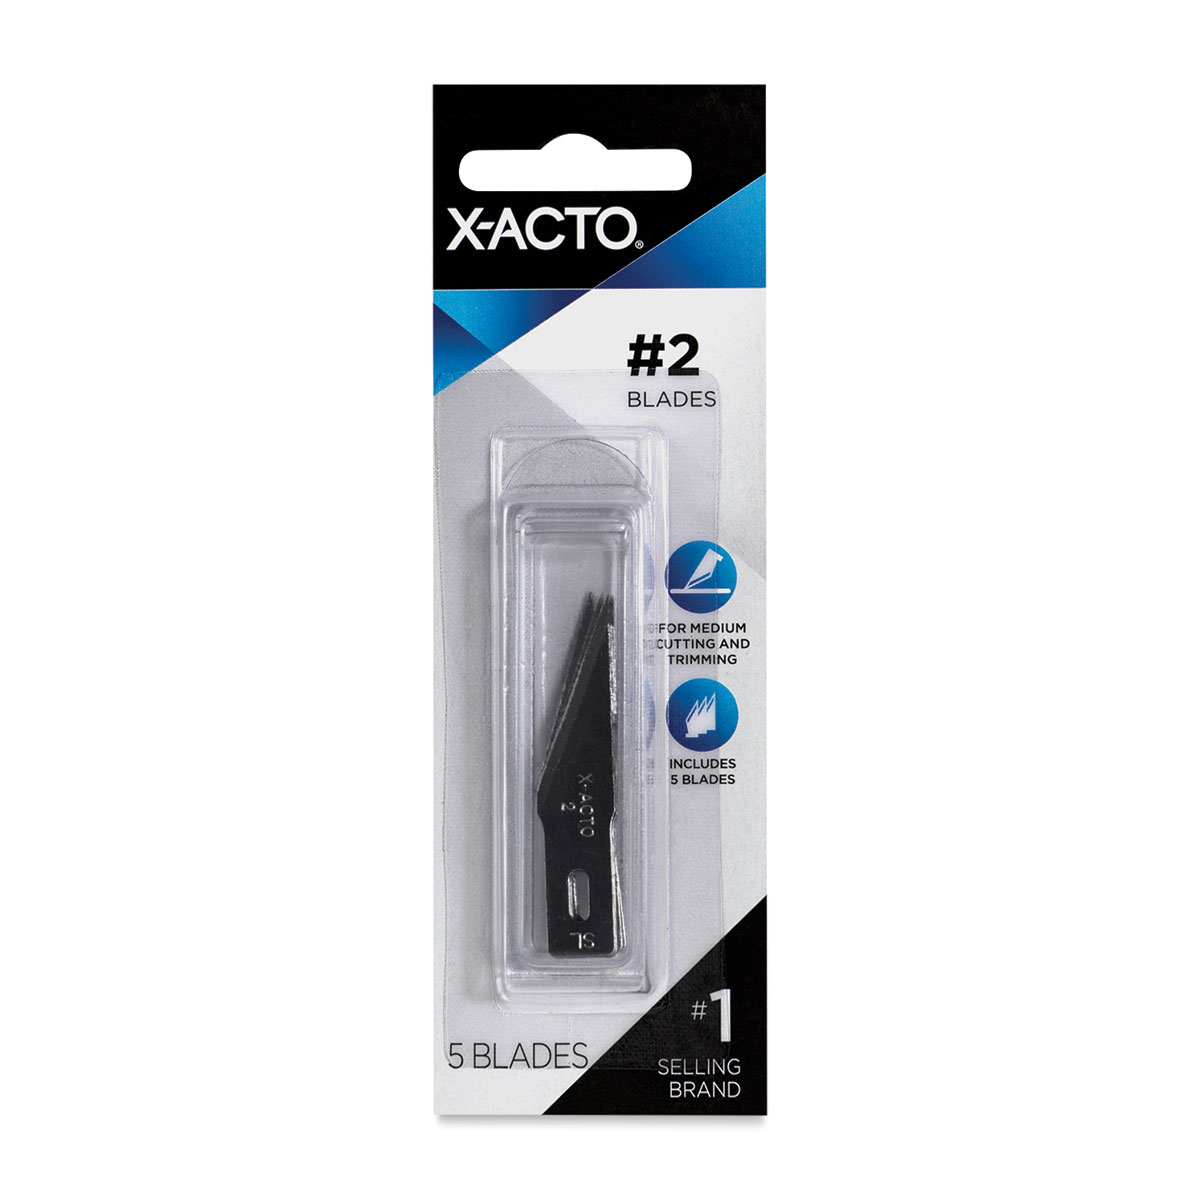 RICARICHE LAME X-ACTO N.30 2 PEZZI REFILL BLADES FOR 7045 SPOKESHAVE 